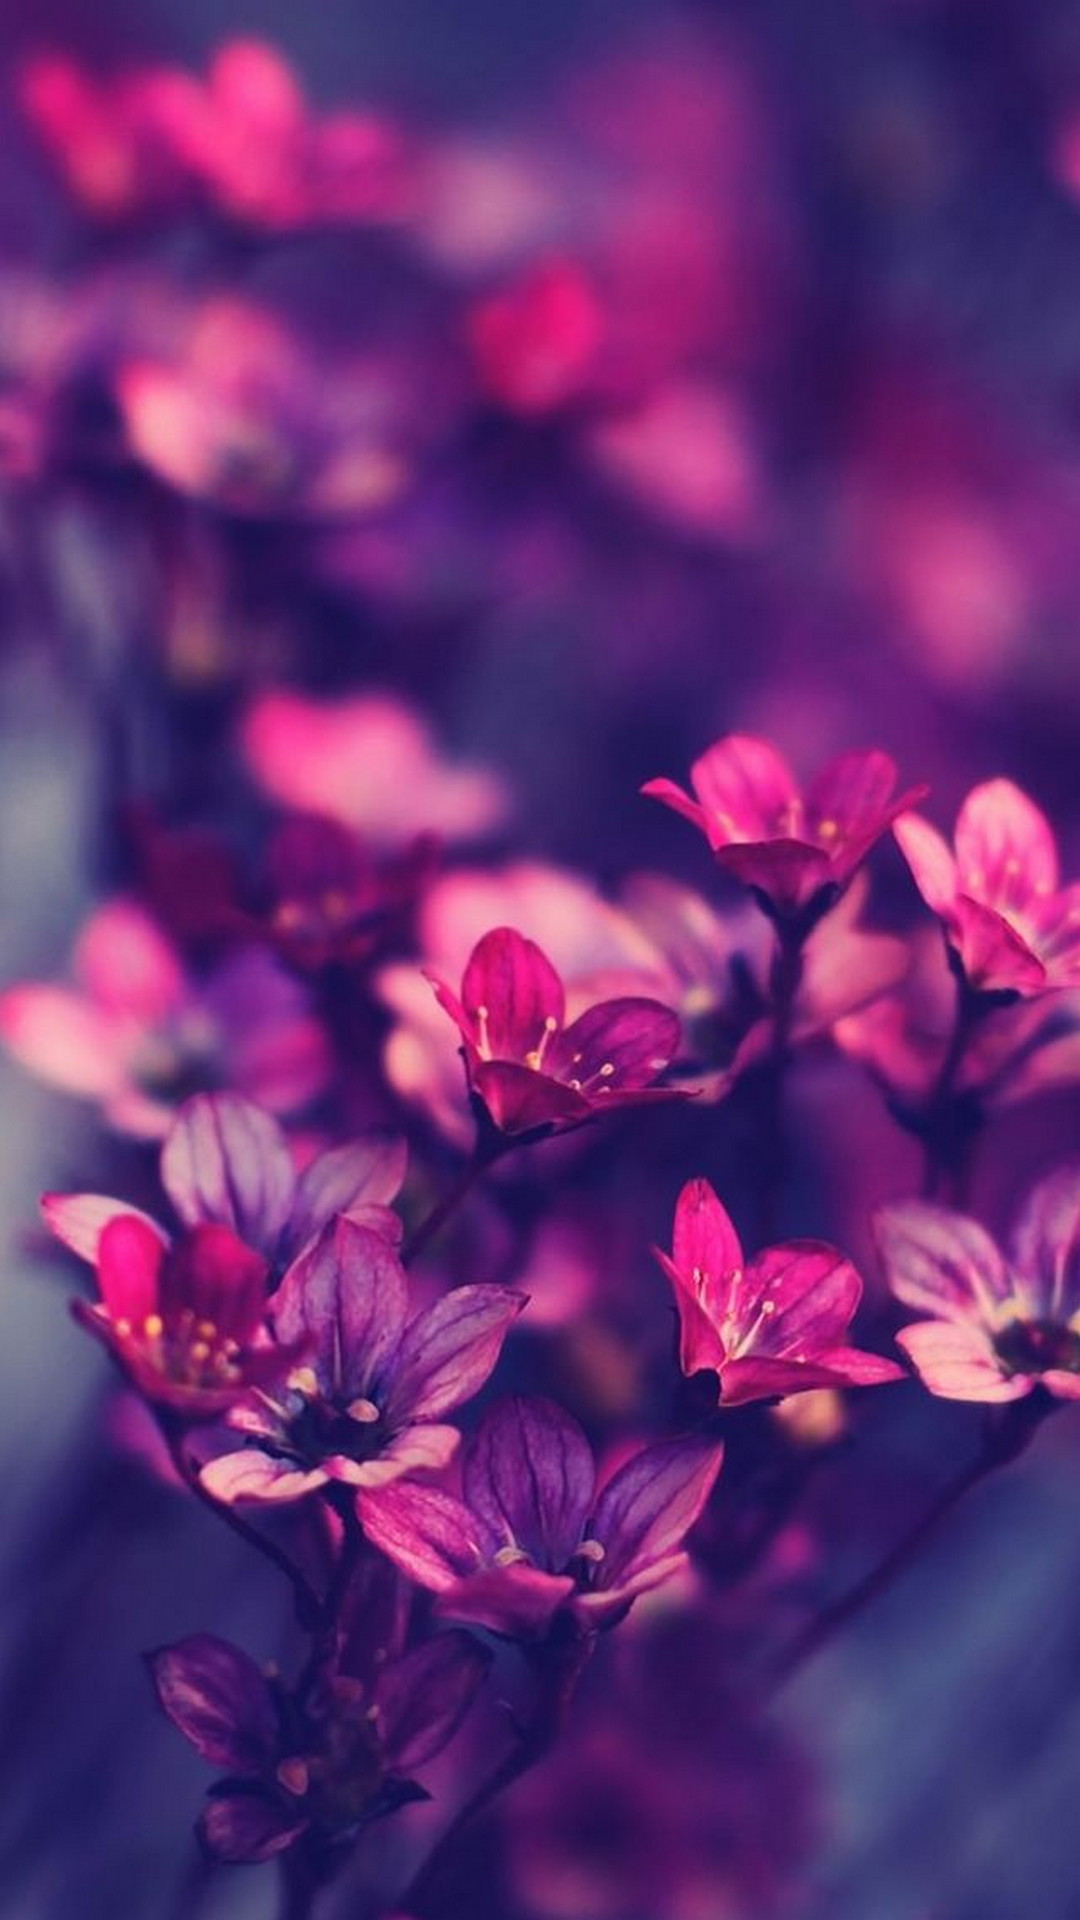 Flowers Purple iPhone Wallpaper HD with high-resolution 1080x1920 pixel. You can set as wallpaper for Apple iPhone X, XS Max, XR, 8, 7, 6, SE, iPad. Enjoy and share your favorite HD wallpapers and background images